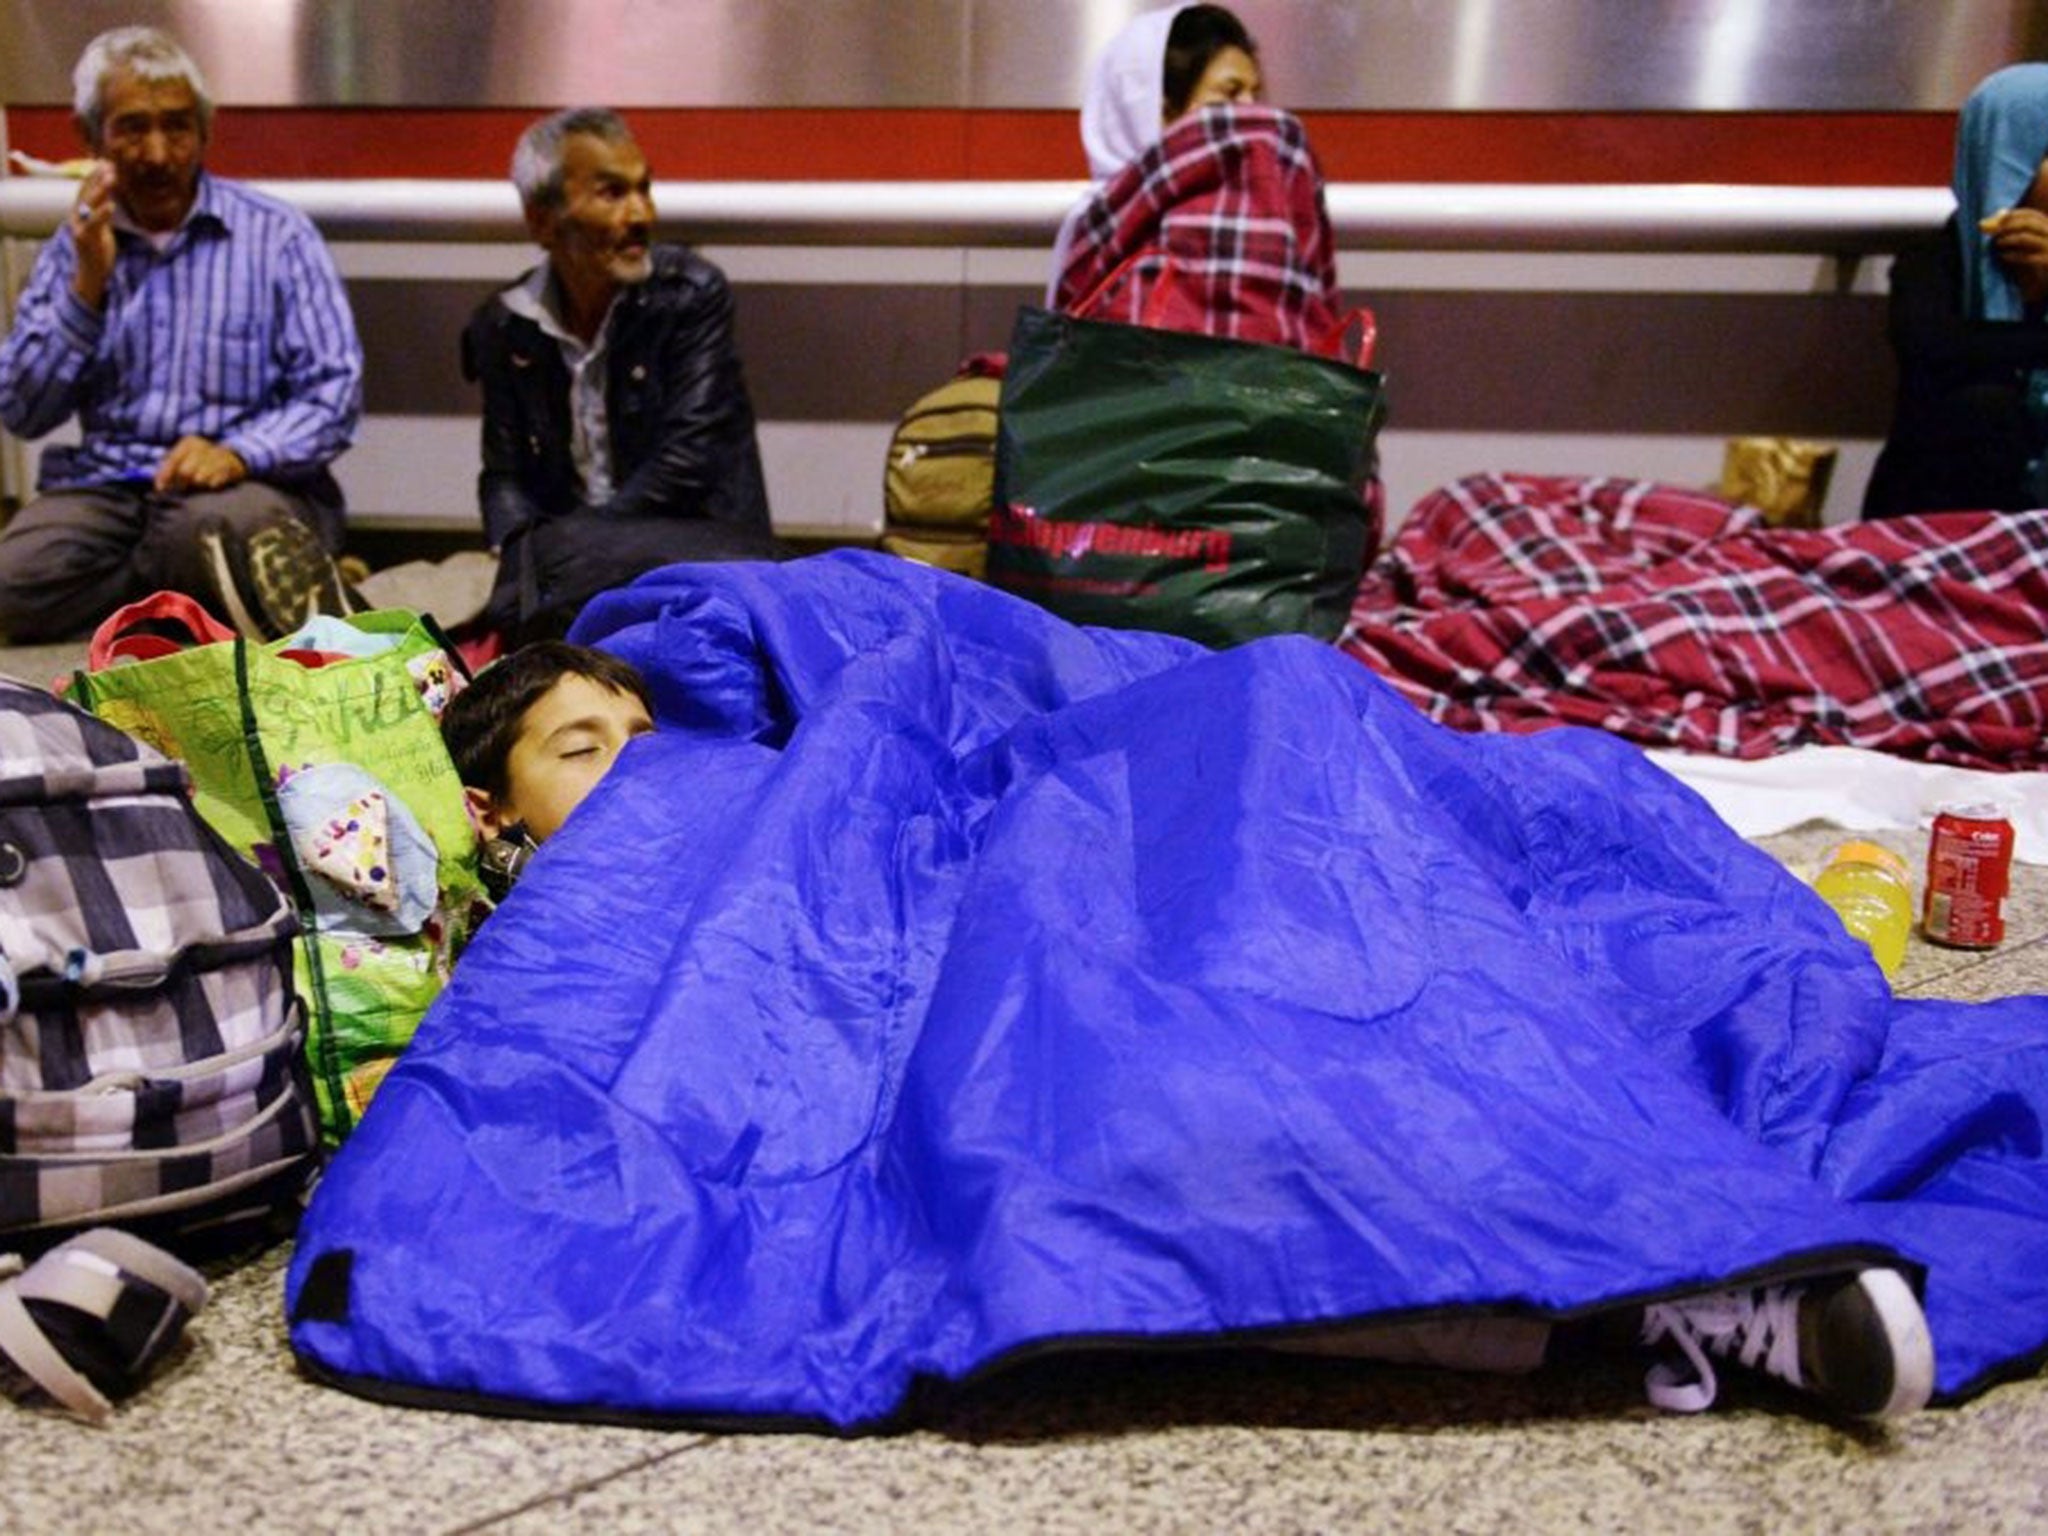 A refugee child from Afghanistan sleeps in the main hall of the train station in Munich, Germany, late 10 September 2015, as in the background other refugees are sitting. Germany expects 800,000 asylum seekers this year, four times more than last year and more than any other country in the European Union, which is split on how to deal with the biggest refugee crisis since World War II.